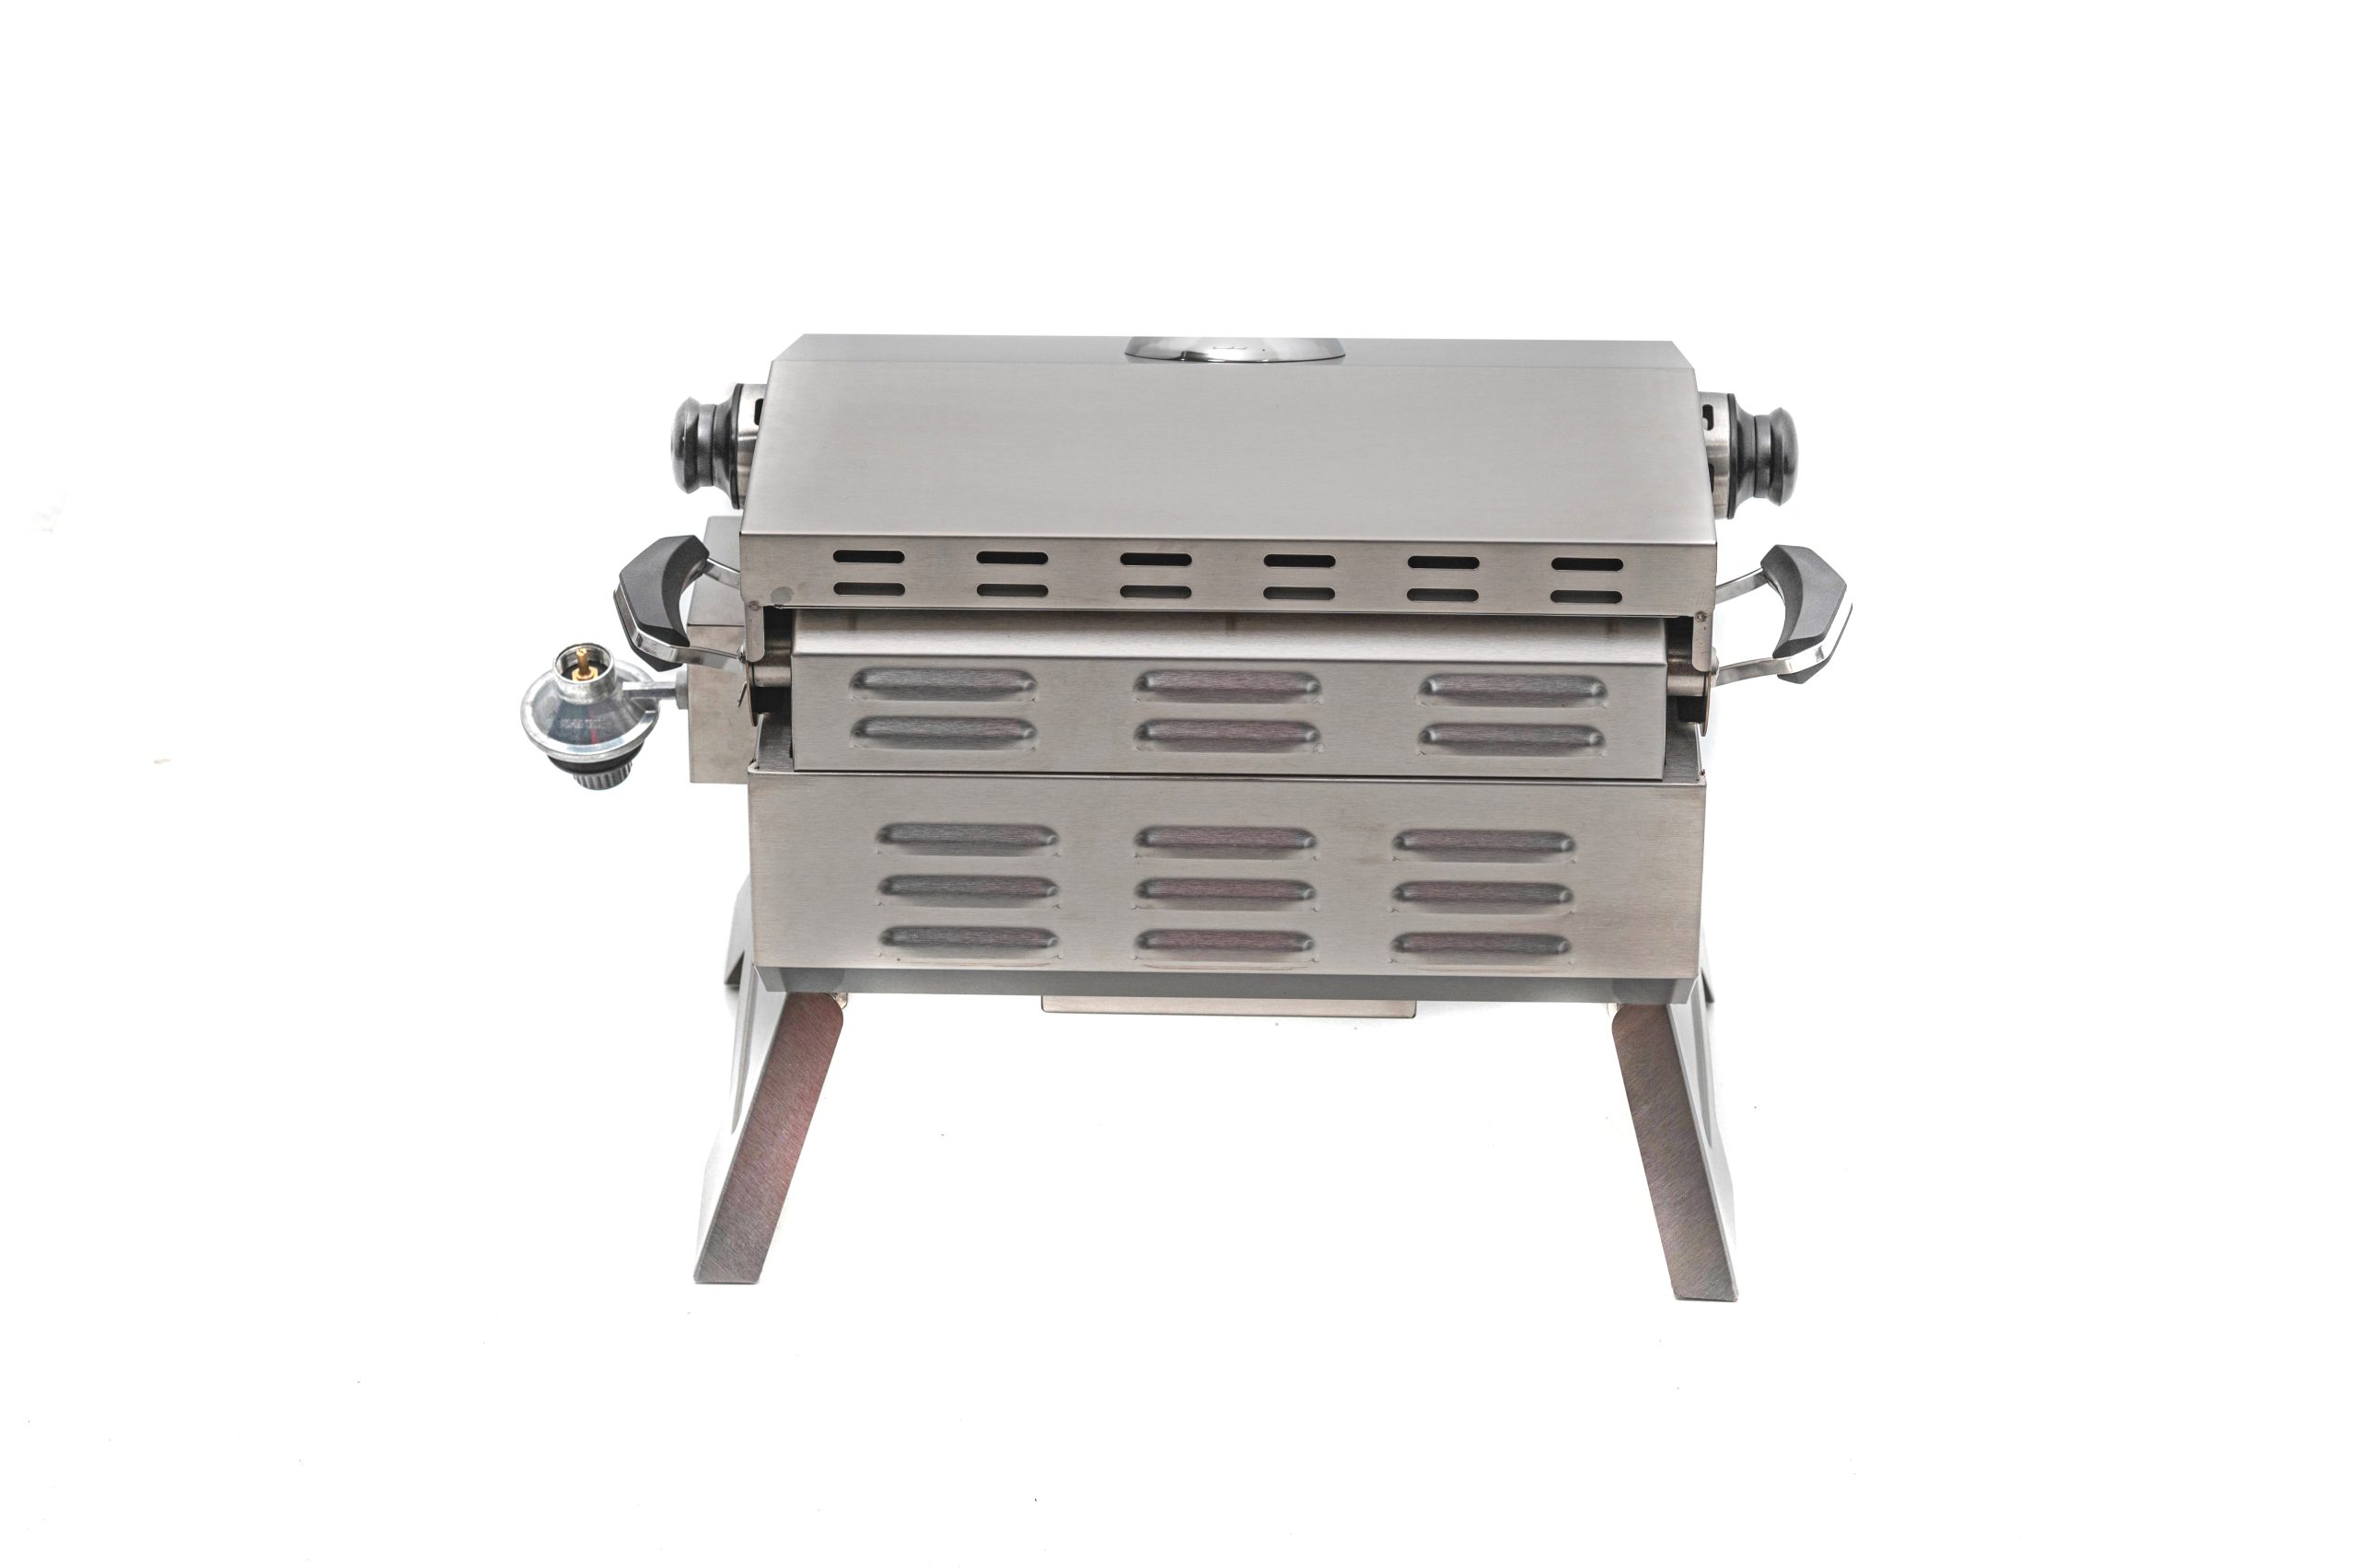 Jackson Grills - VERSA 50 PORTABLE STAINLESS STEEL GAS GRILL